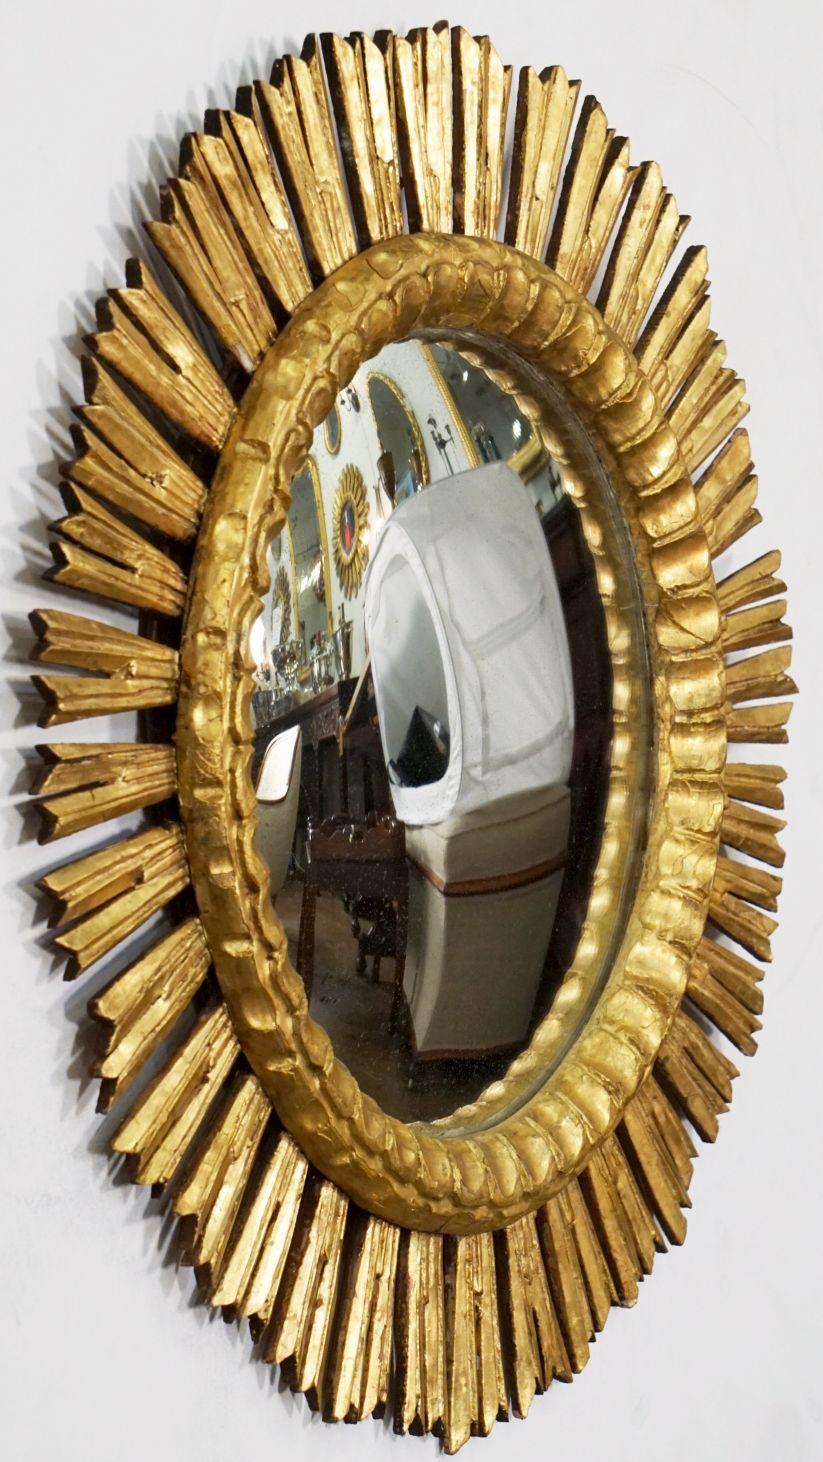 A lovely large Spanish gilt sunburst or starburst convex mirror, 25 inches diameter, with round mirrored convex glass center in a moulded frame surrounded by emanating gilded rays.